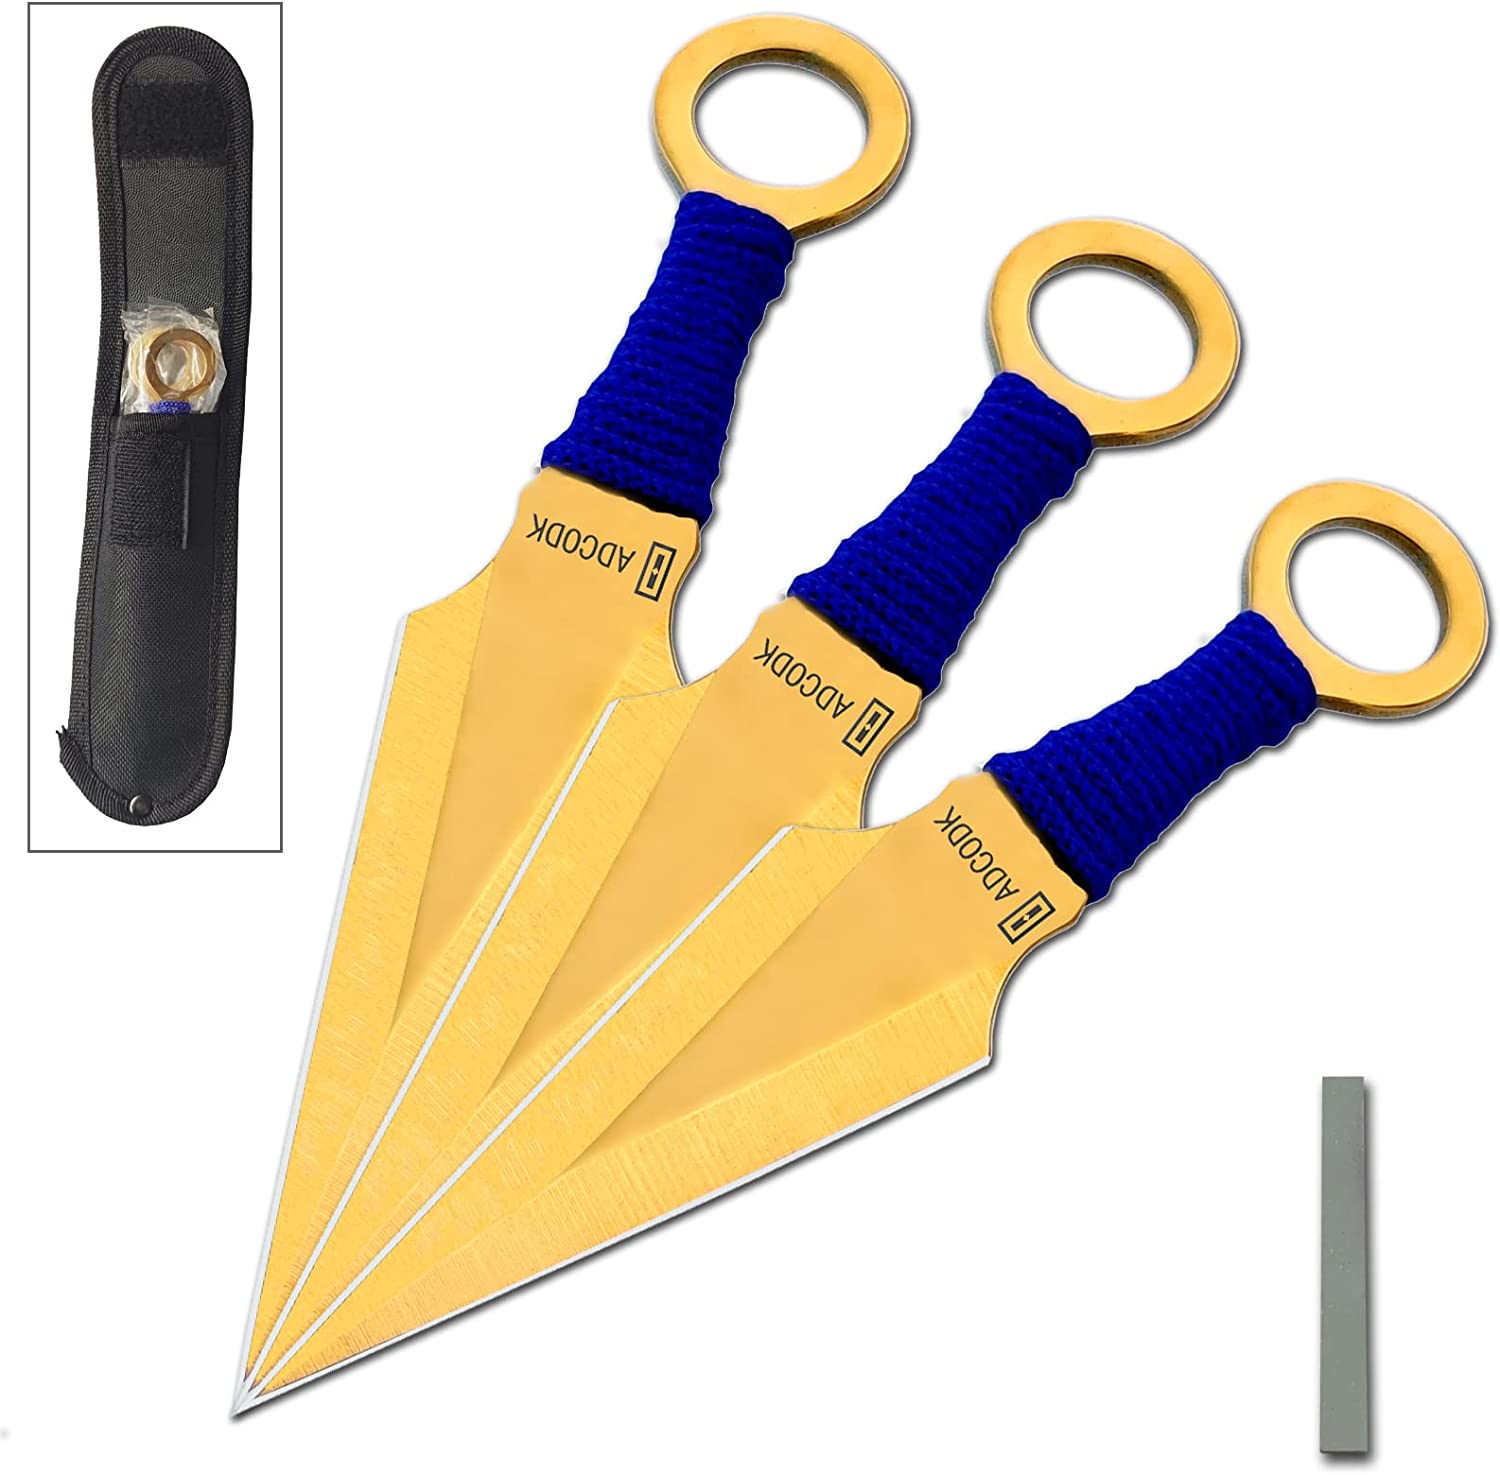 ADCODK Throwing Knives Set Double-edged Blades 3 Gold Tan Kunai Knife Hunting Knives with Cord-wrapped Handles With Nylon Sheath and Sharpening Stone